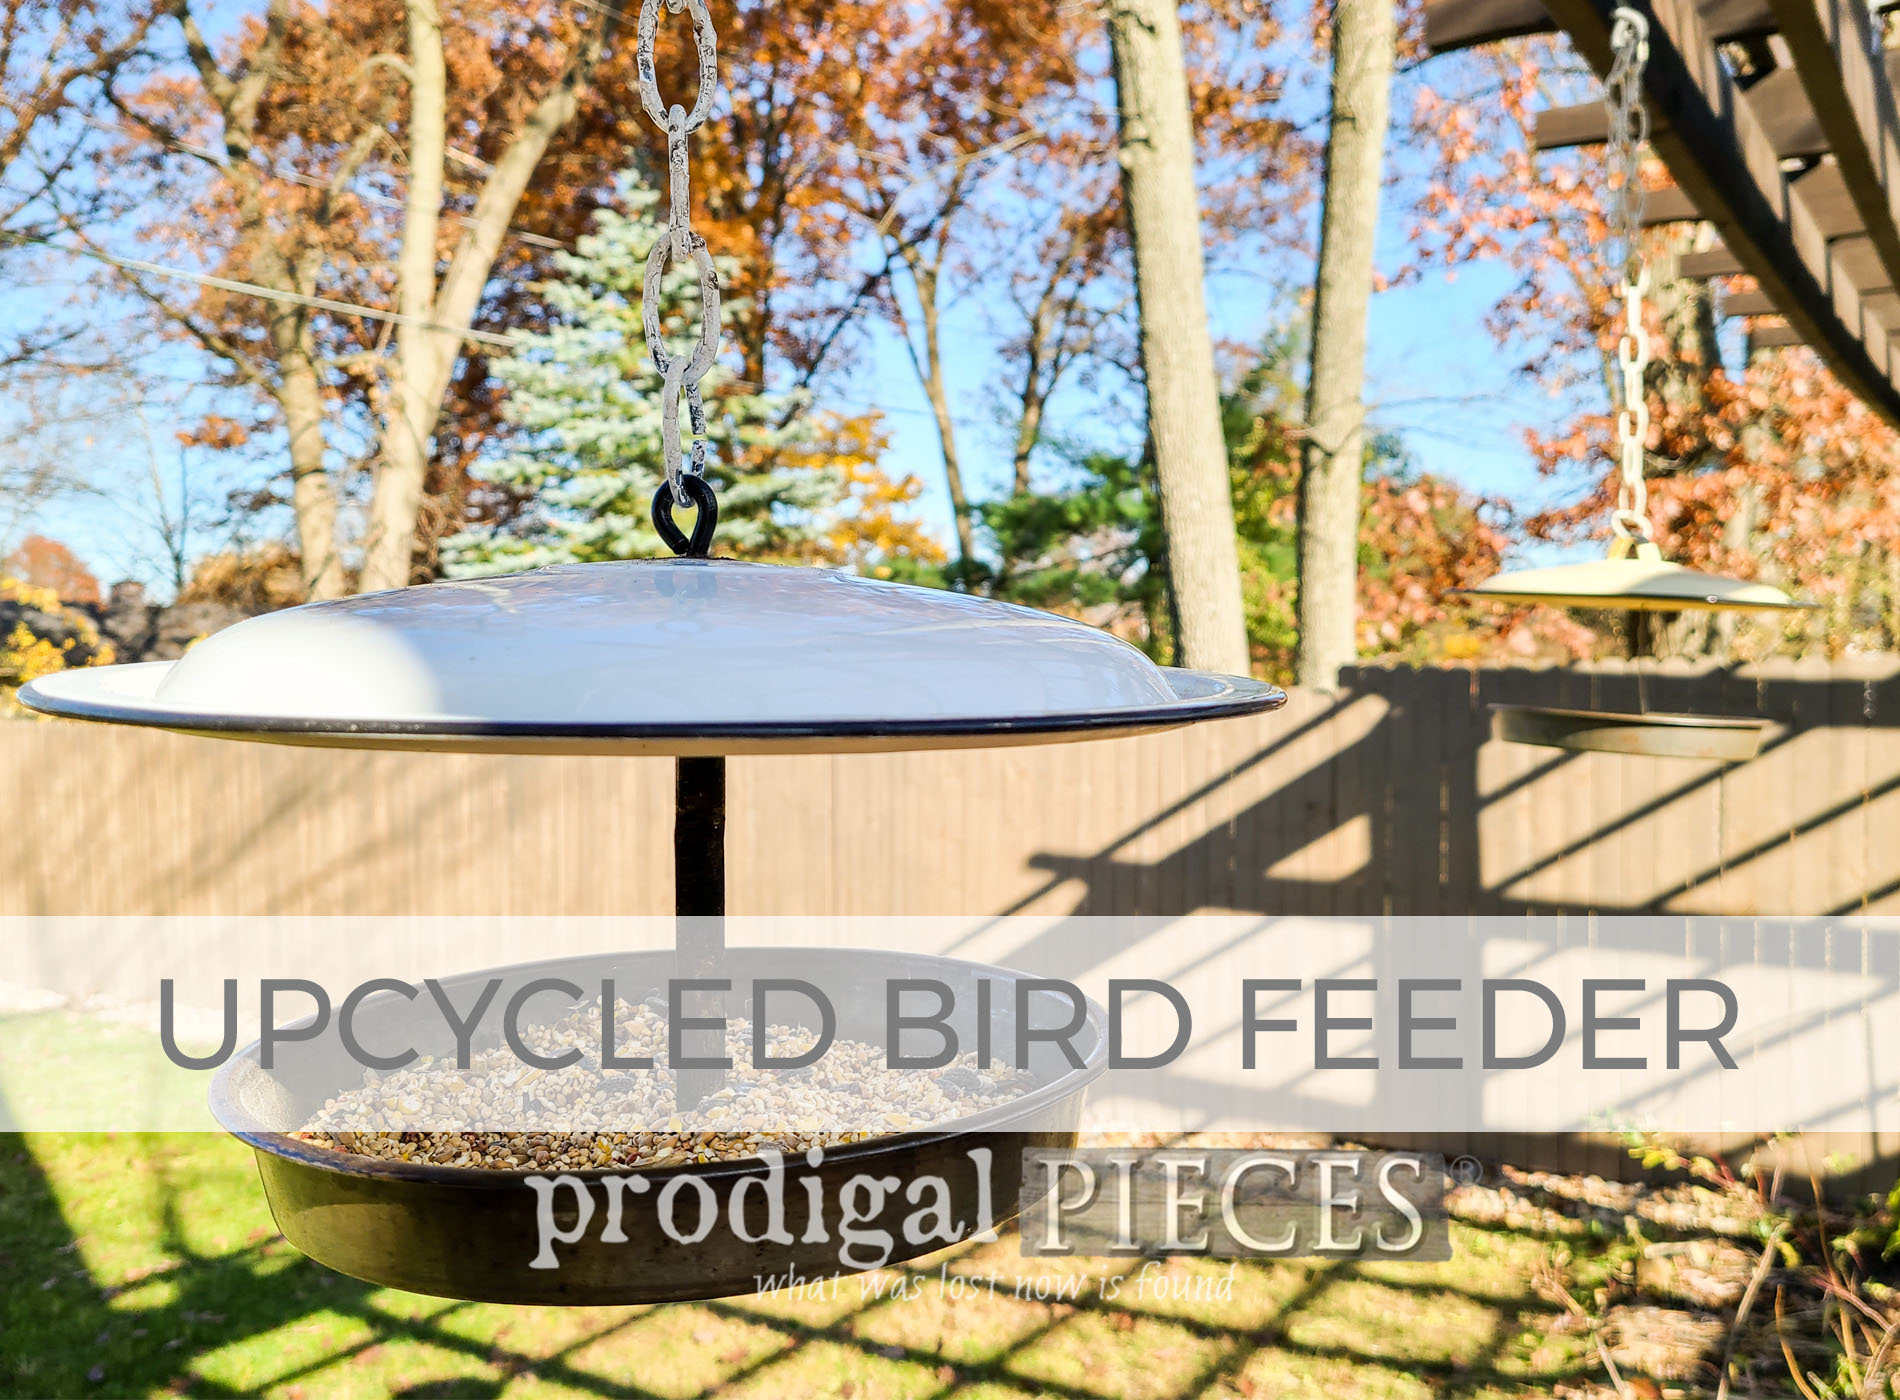 Upcycled Bird Feeder from Misfit Parts by Larissa of Prodigal Pieces | prodigalpieces.com #prodigalpieces